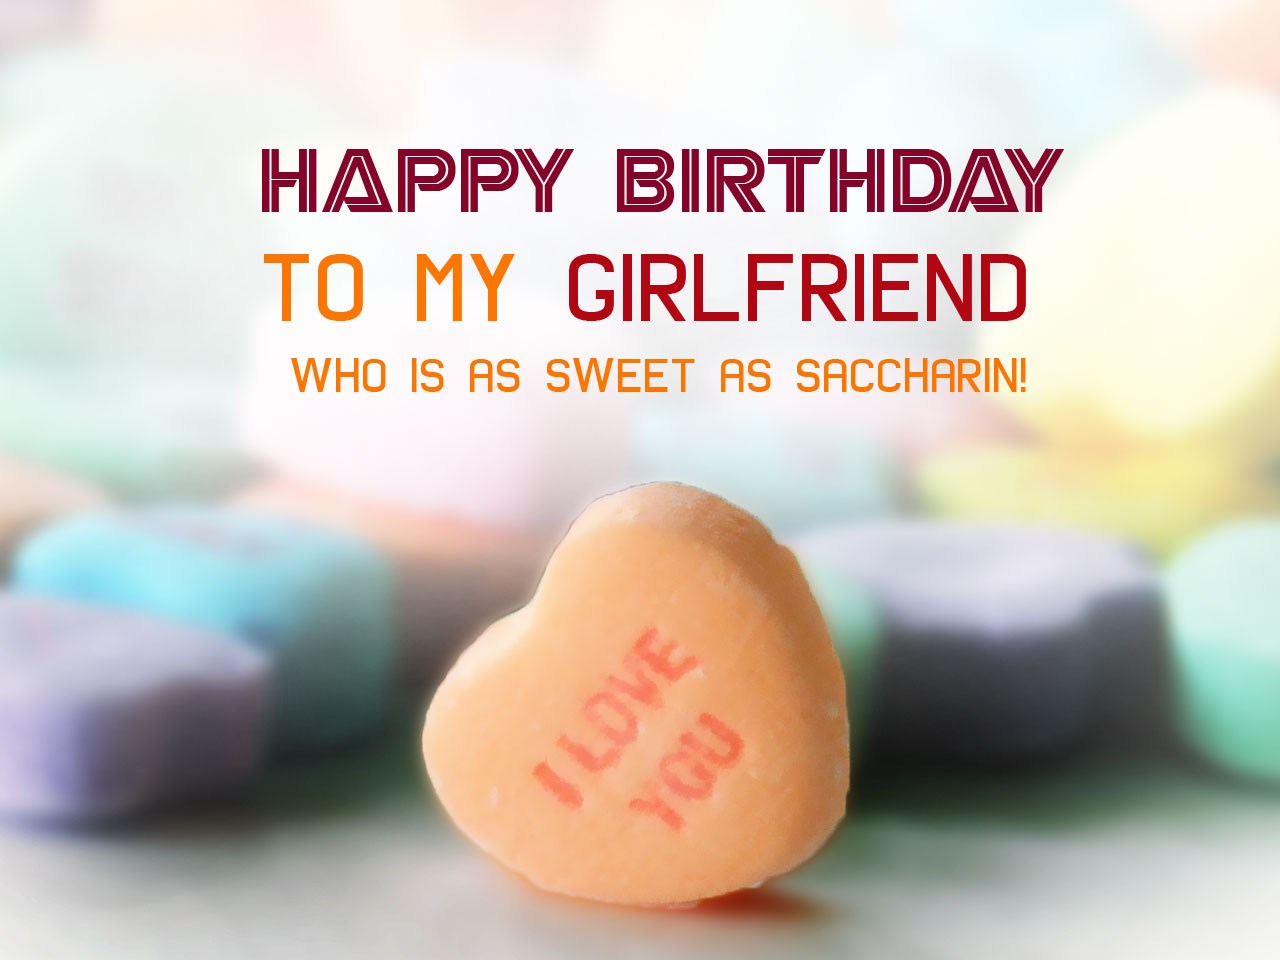 Birthday Wishes For Girlfriend - Birthday Images, Pictures